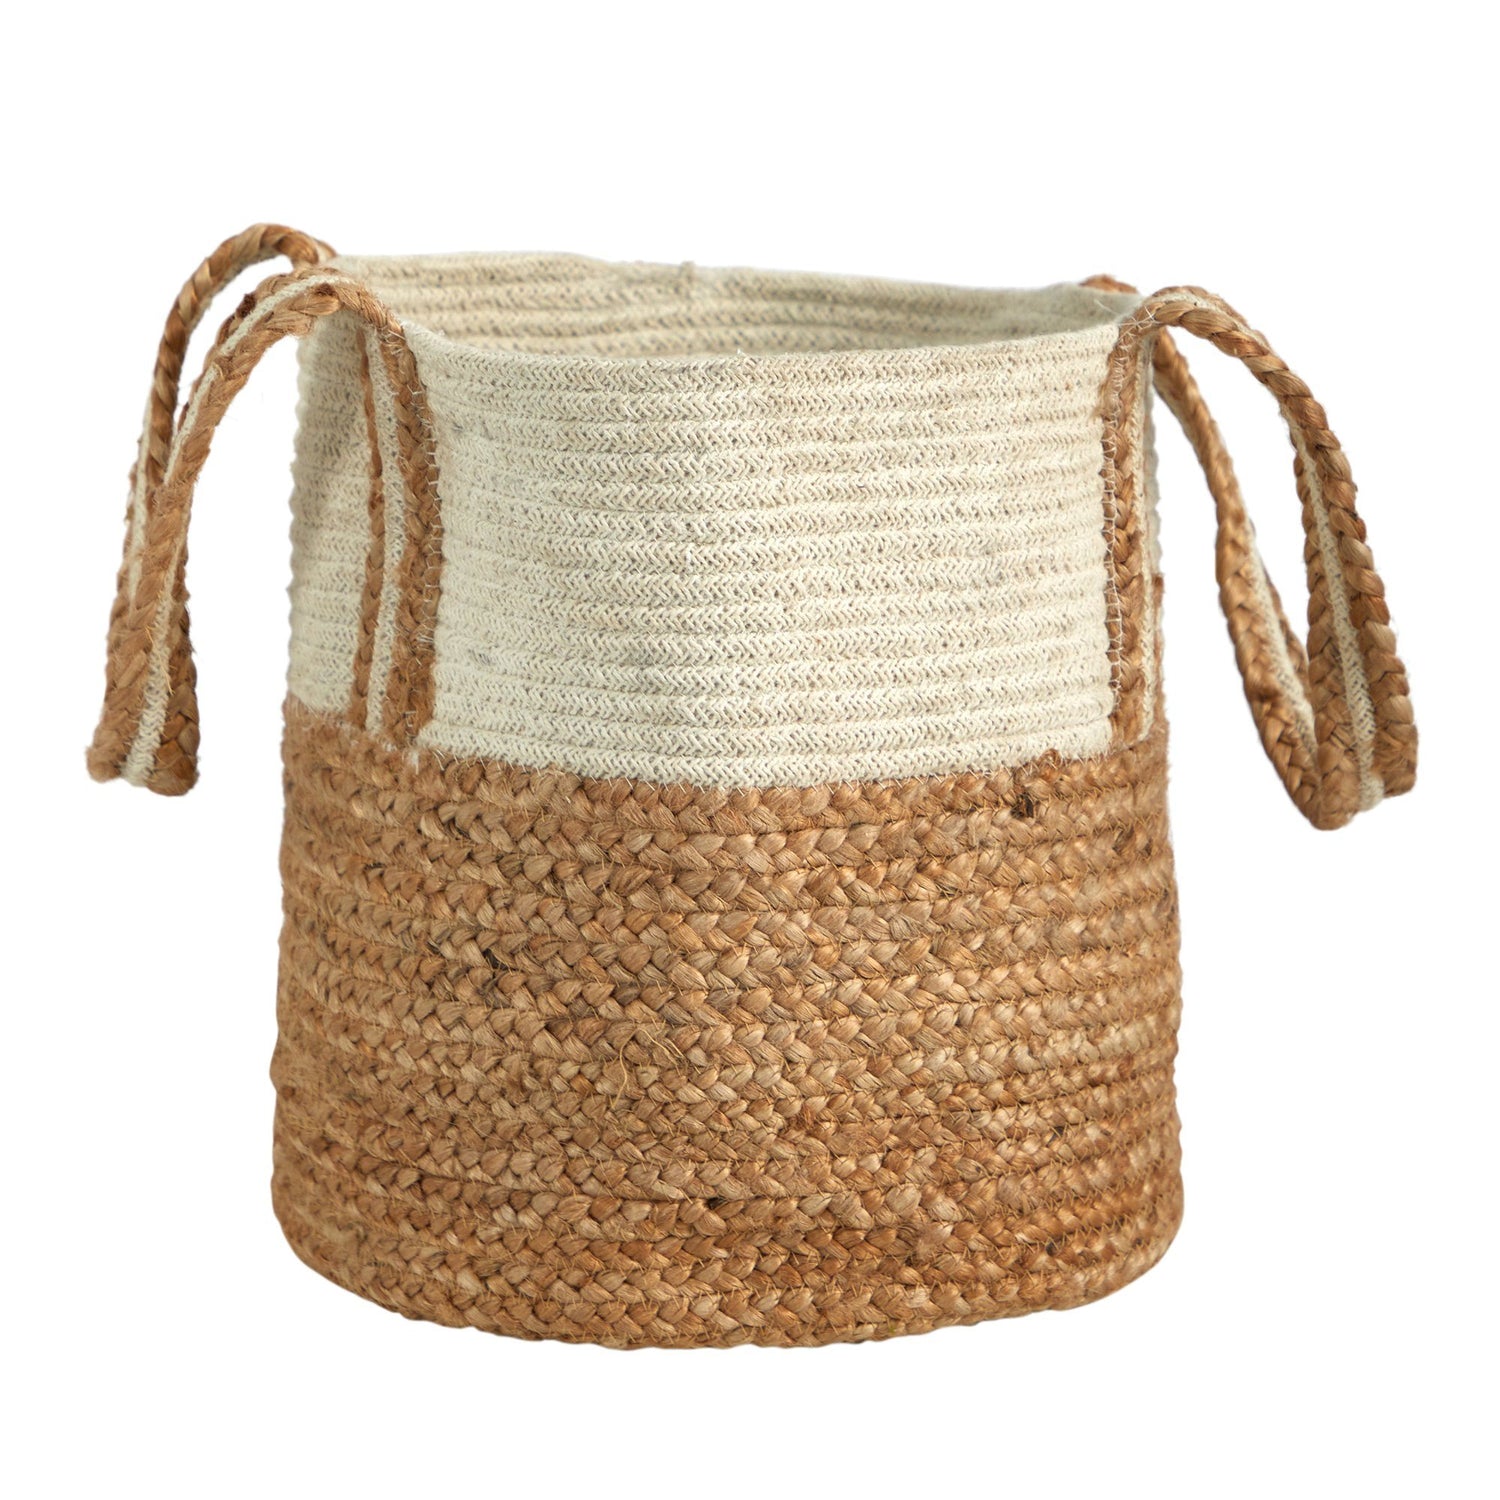 14” Boho Chic Basket Natural Cotton and Jute with Handles